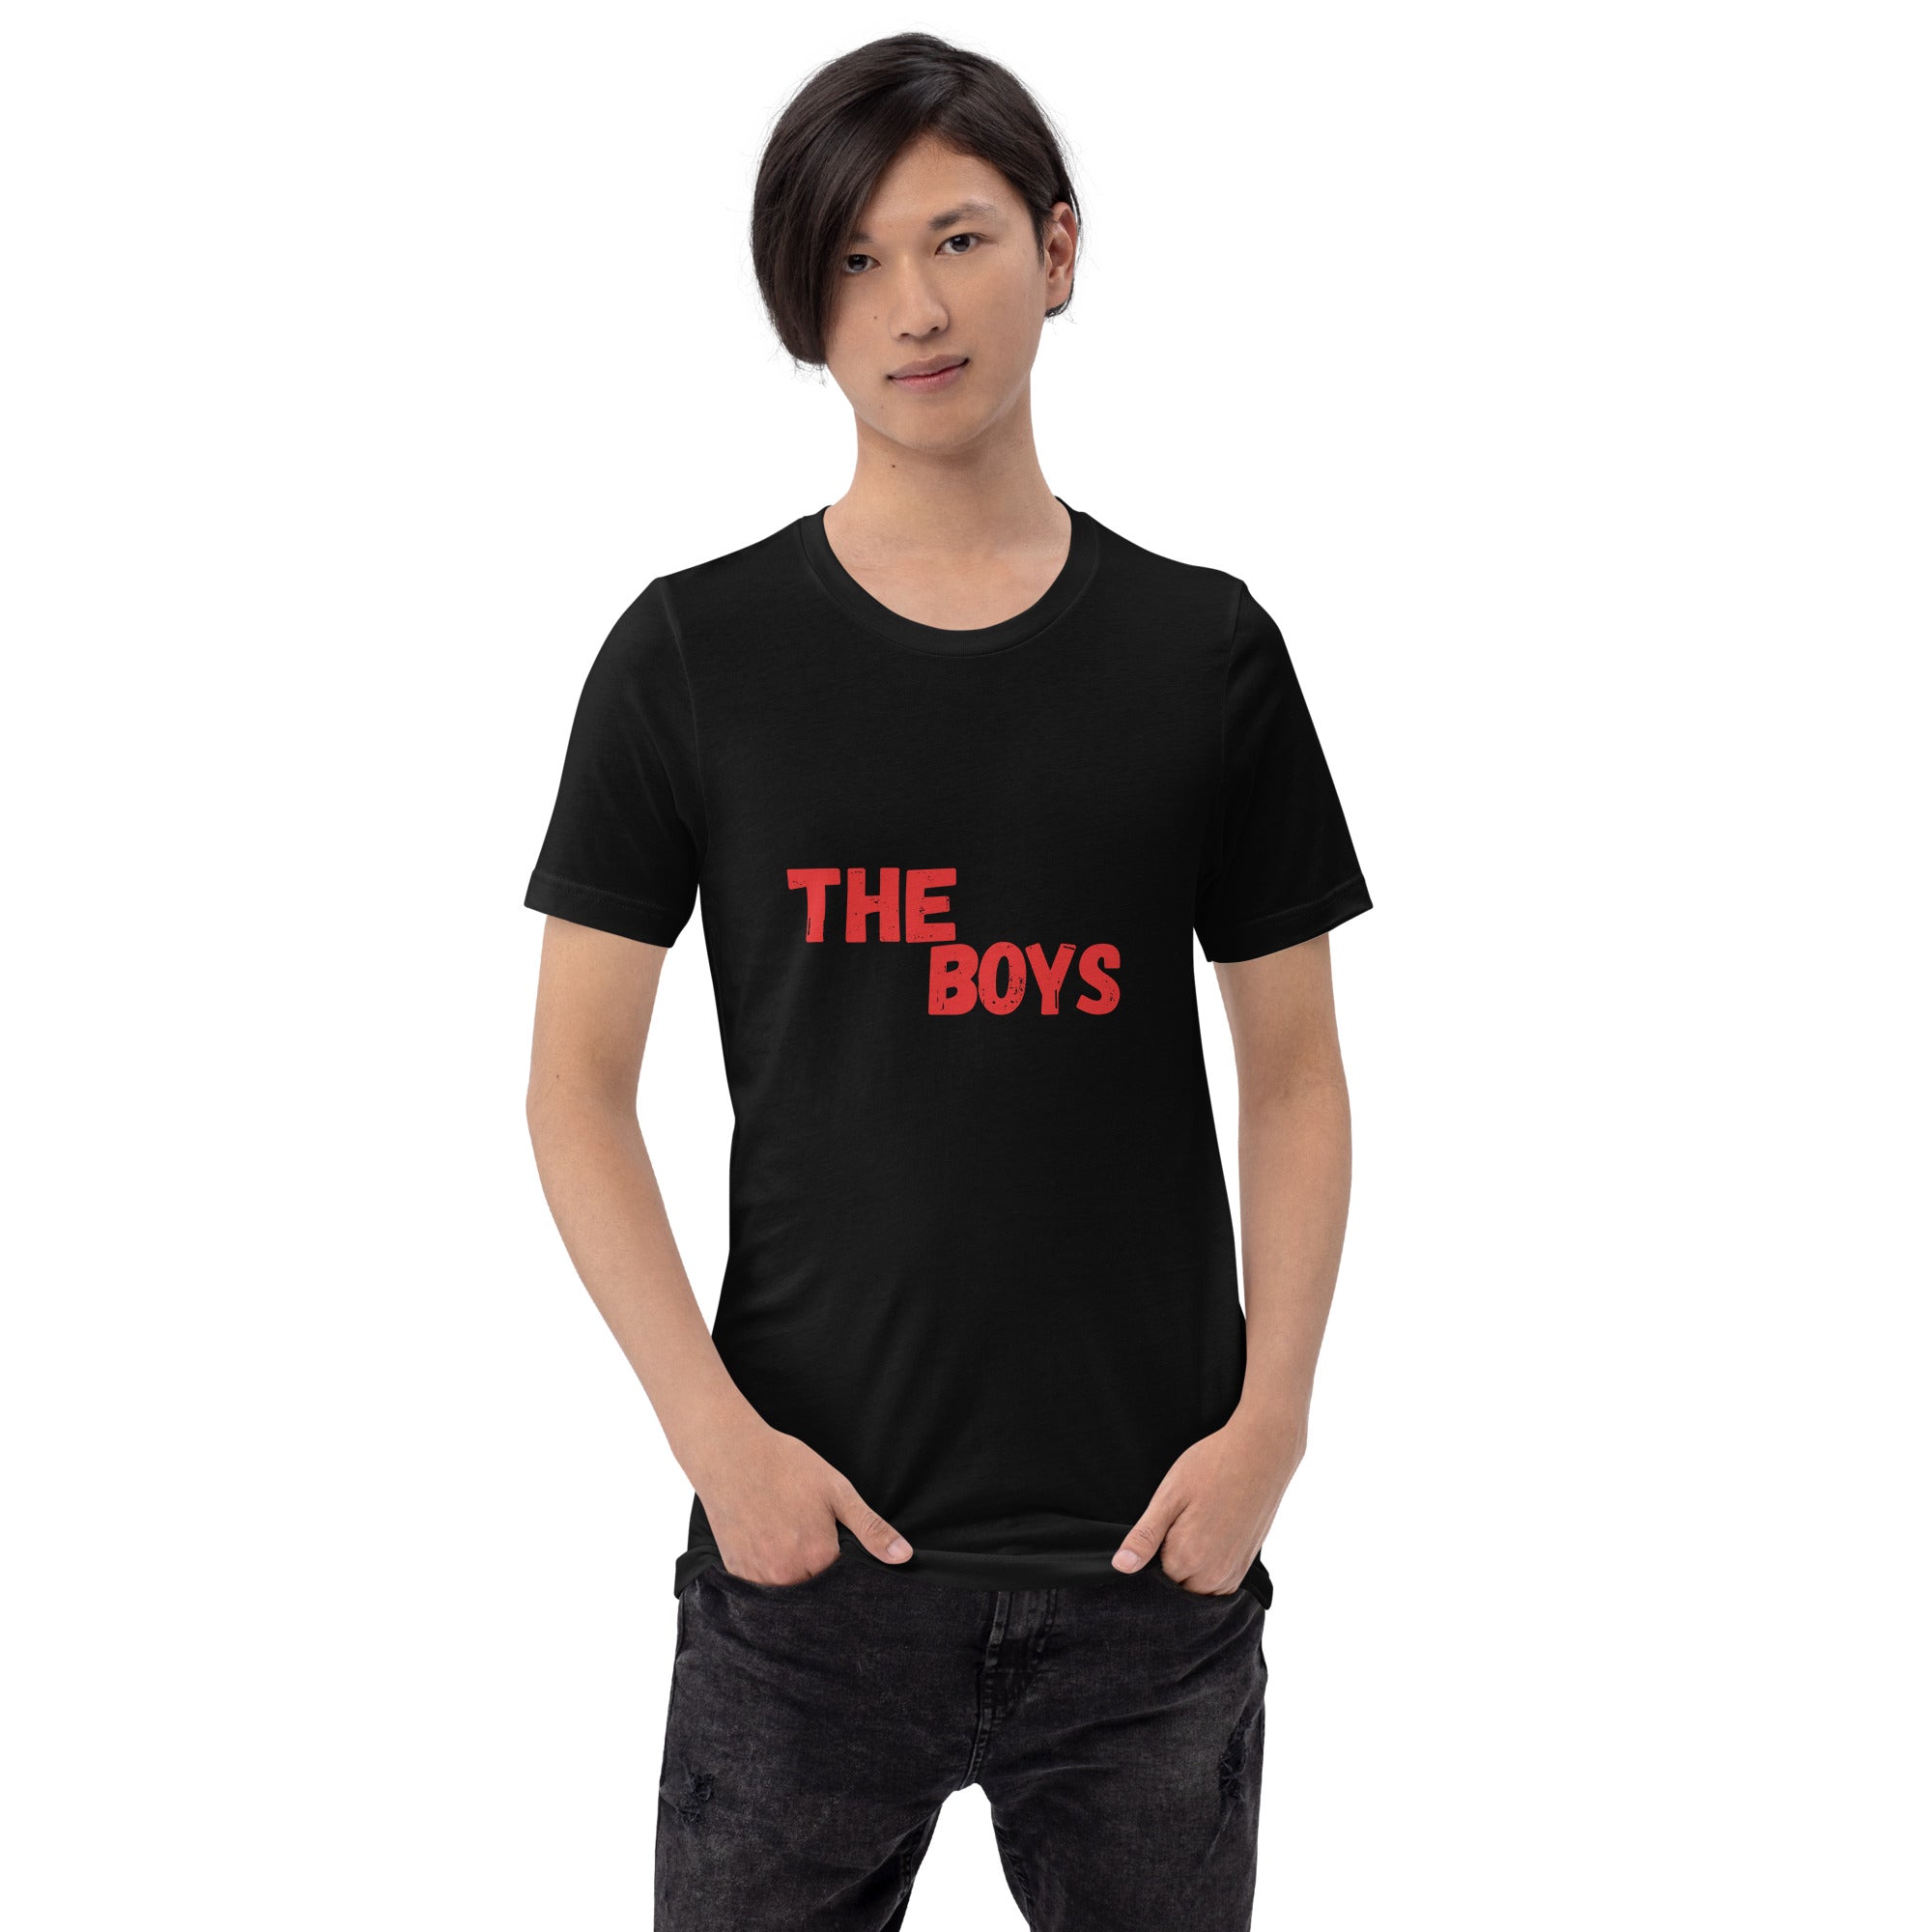 Amazon Original The Boys t shirt for men pure cotton in black and white